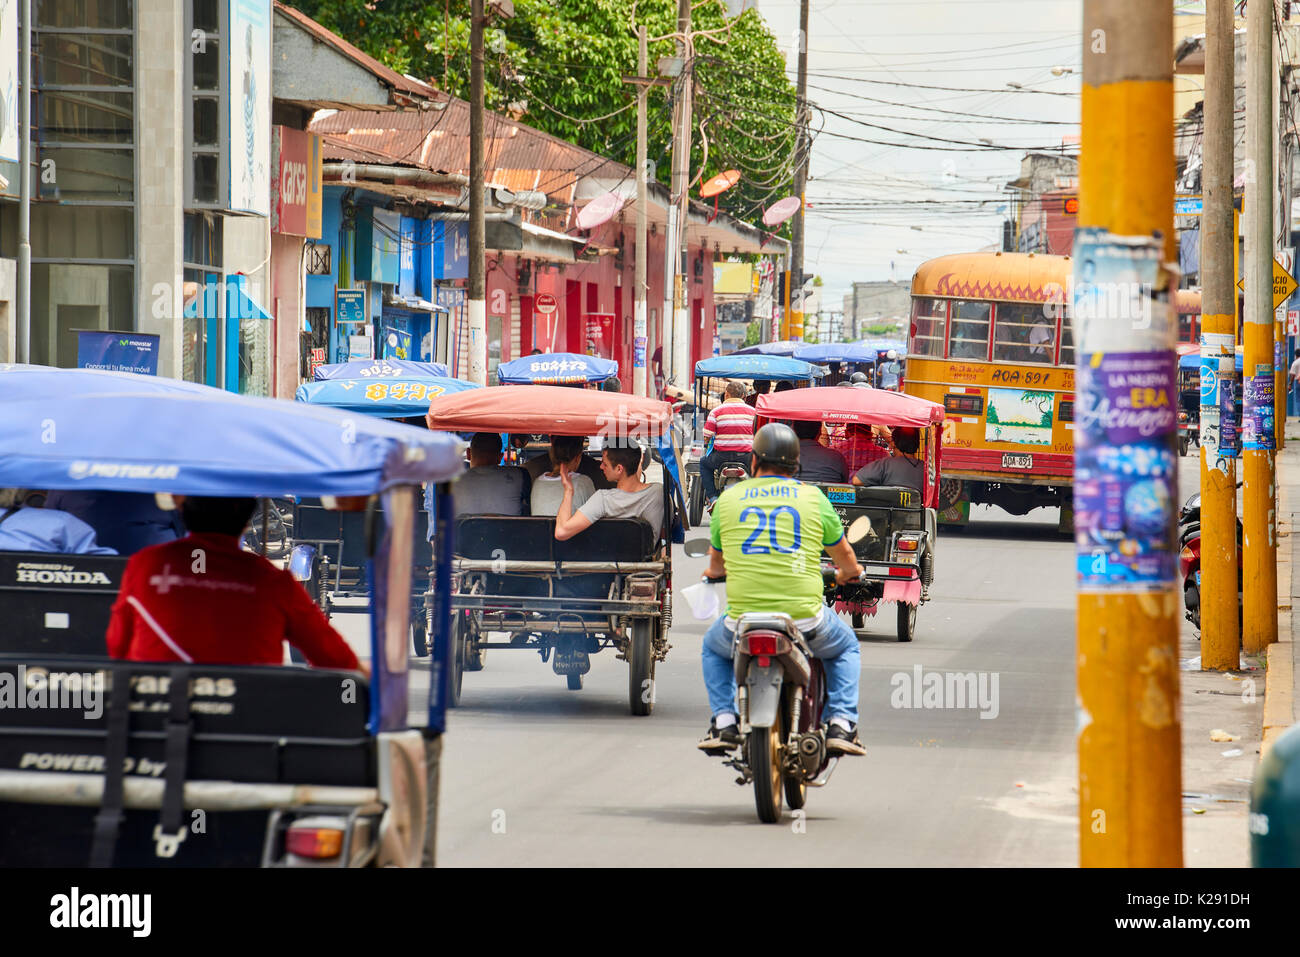 Very busy street in Iquitos, Peru. The popular mototaxis, a type of rickshaw, is the most popular form of the public transport in the city. Stock Photo